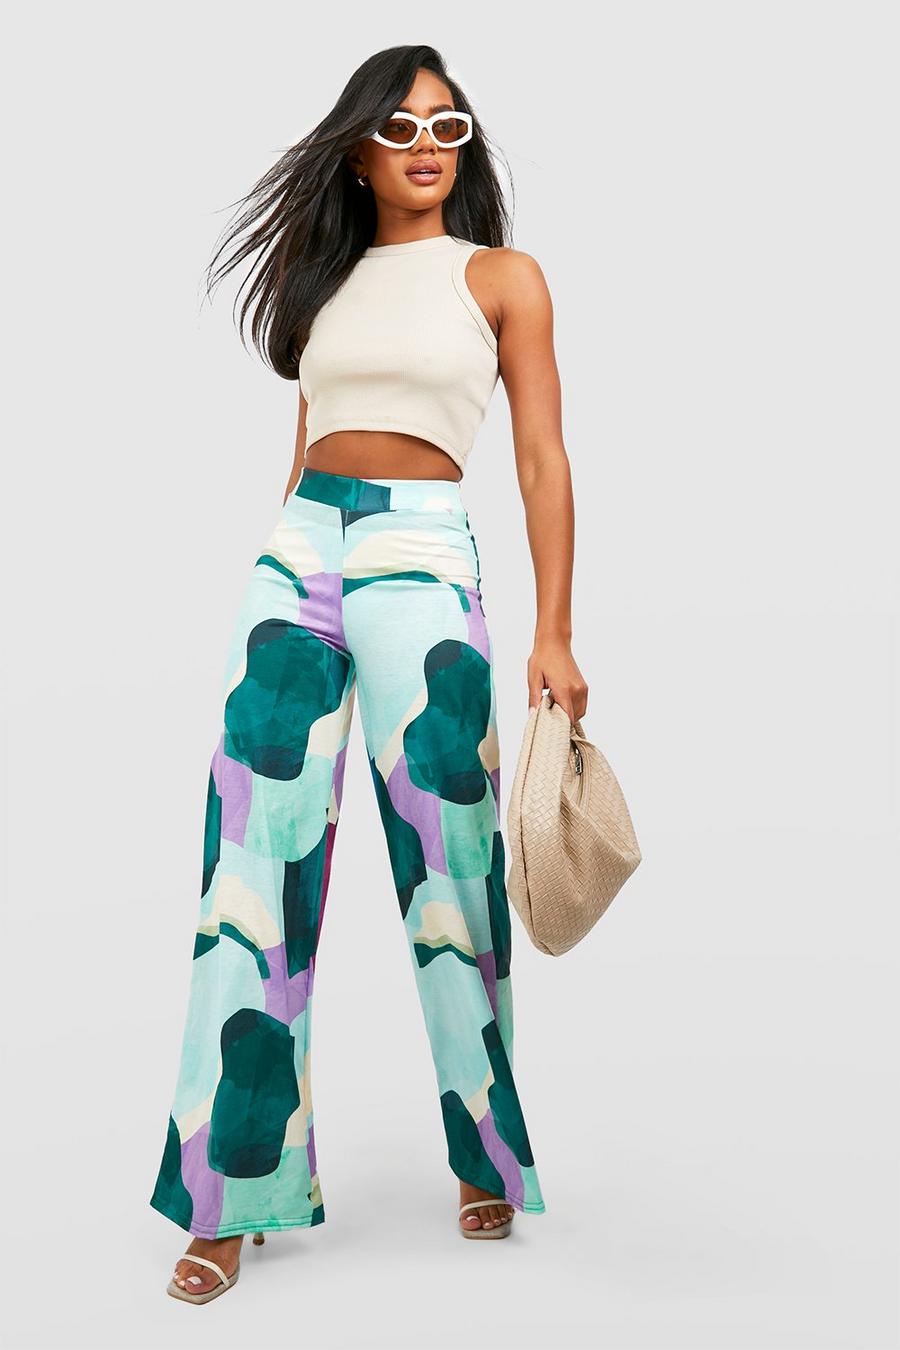 Best 25+ Deals for Printed Pants